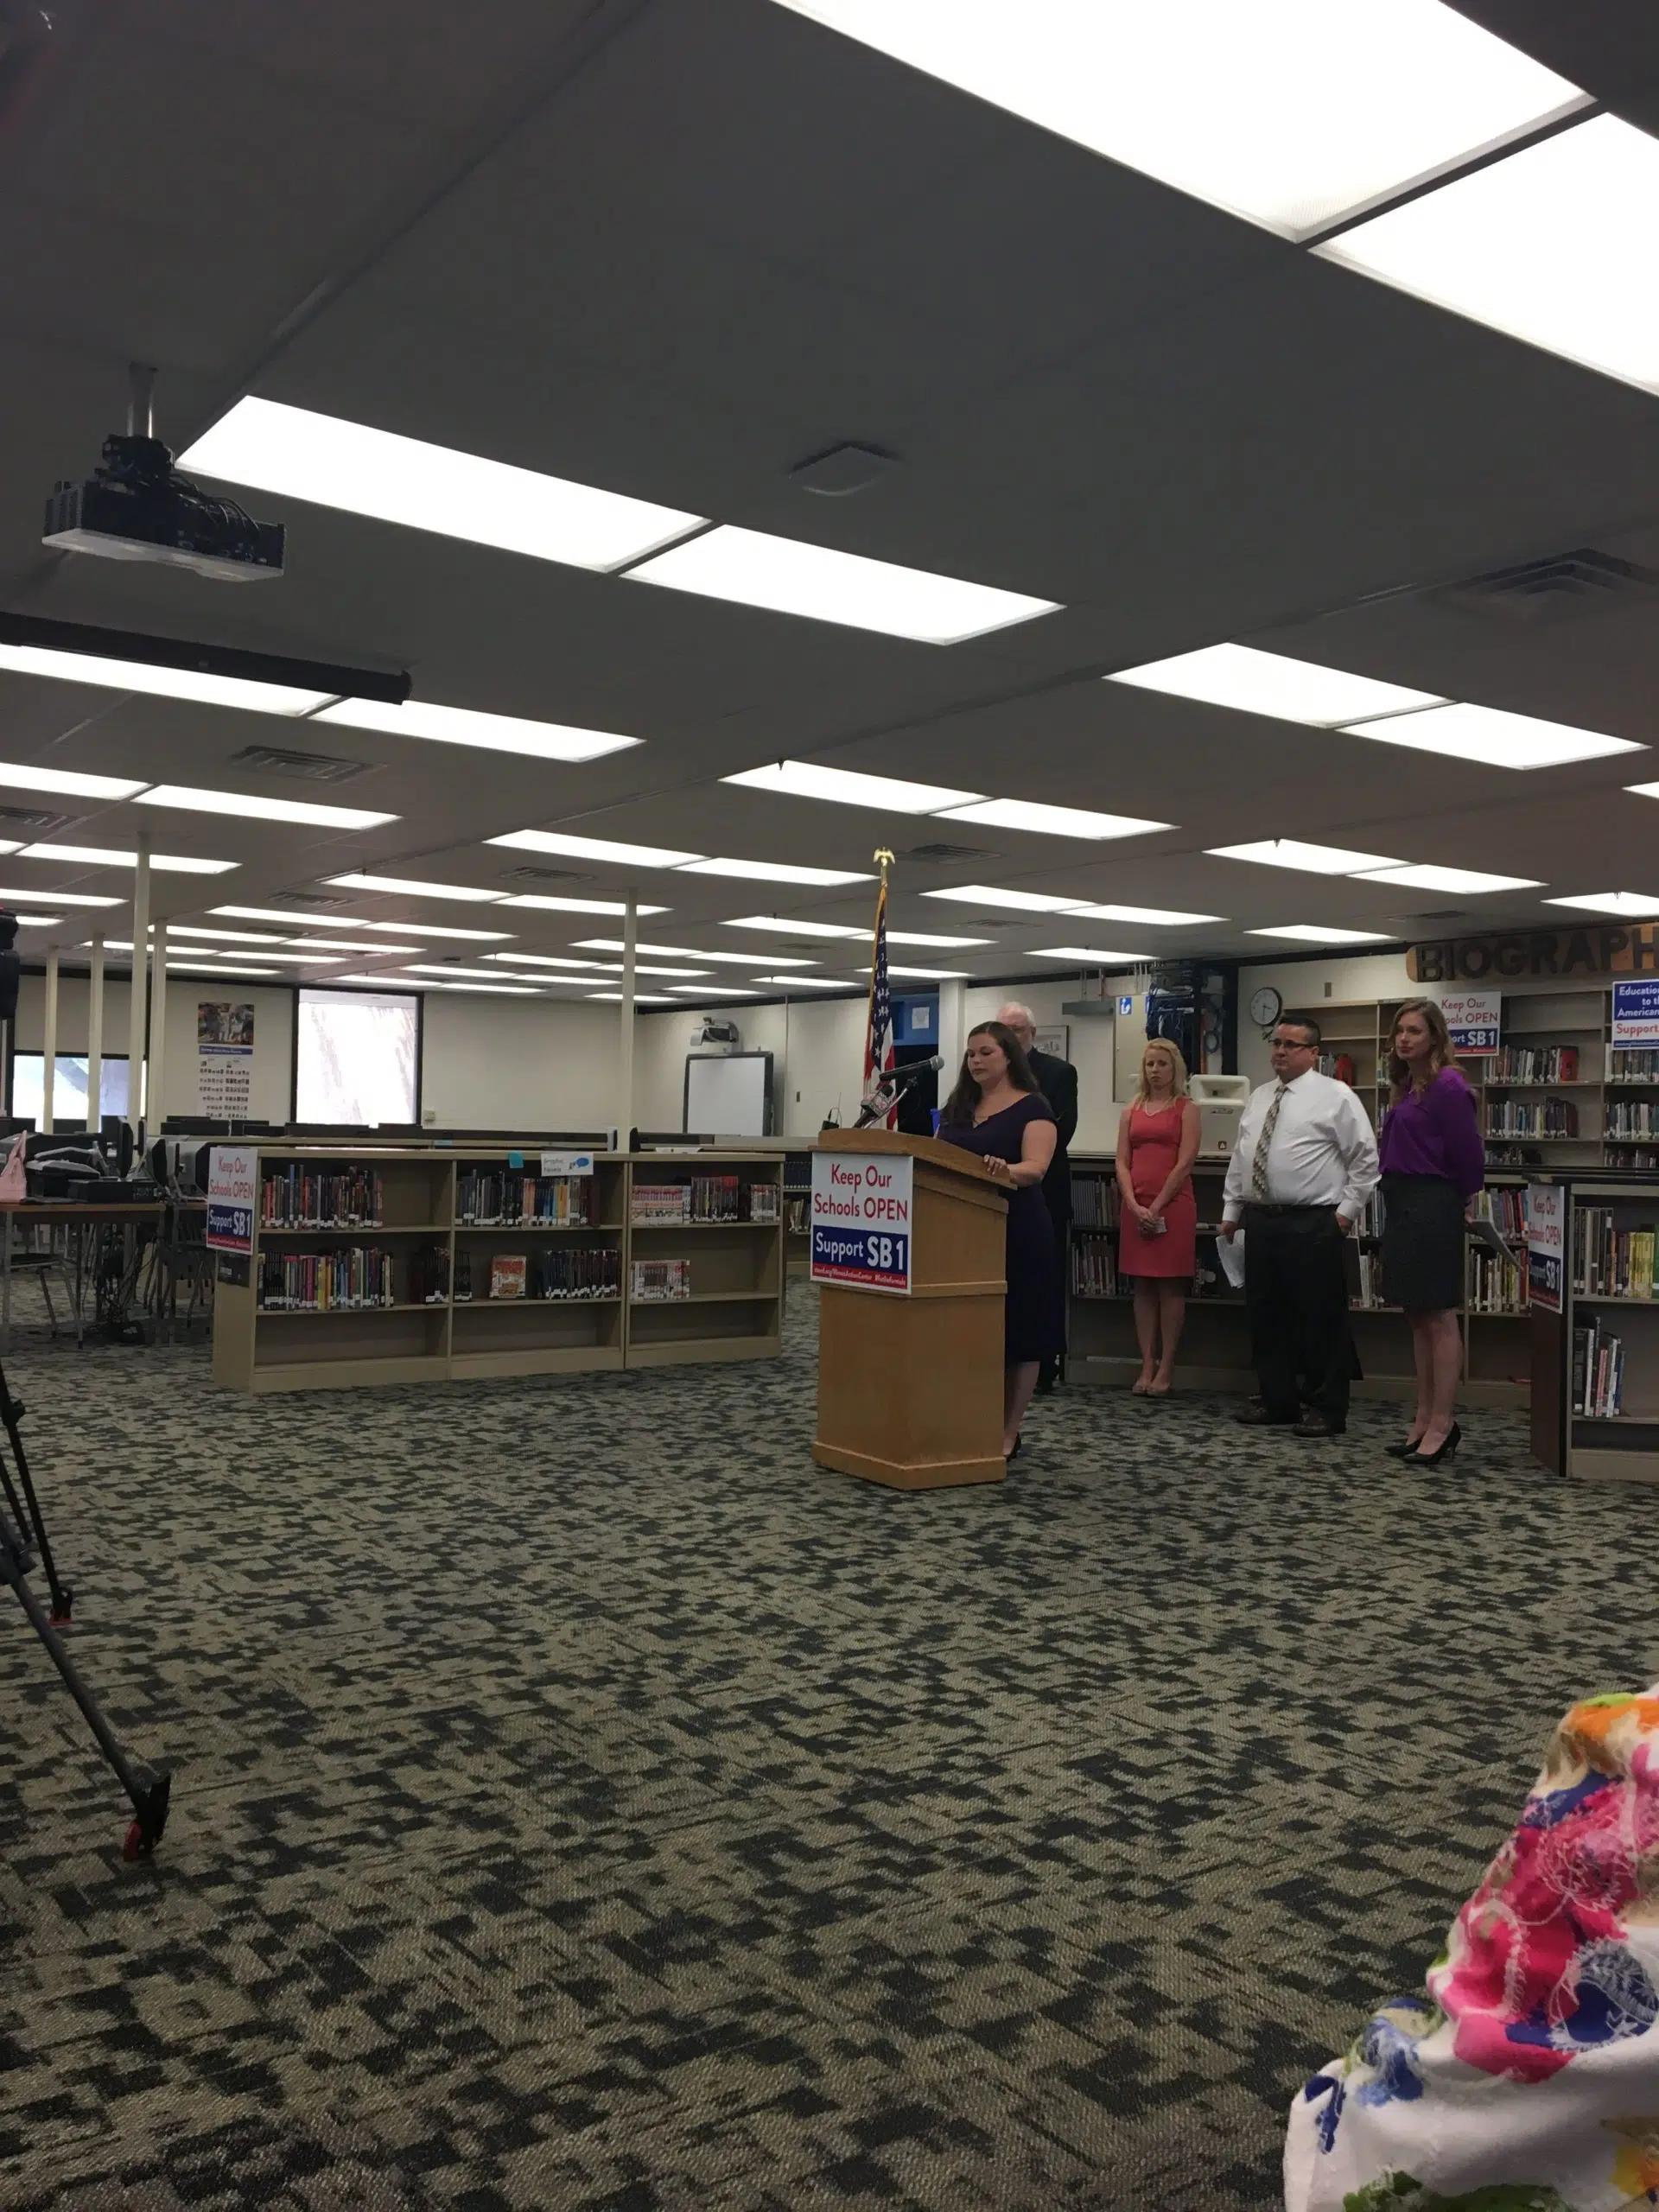 Local School Leaders and Officials want SB1